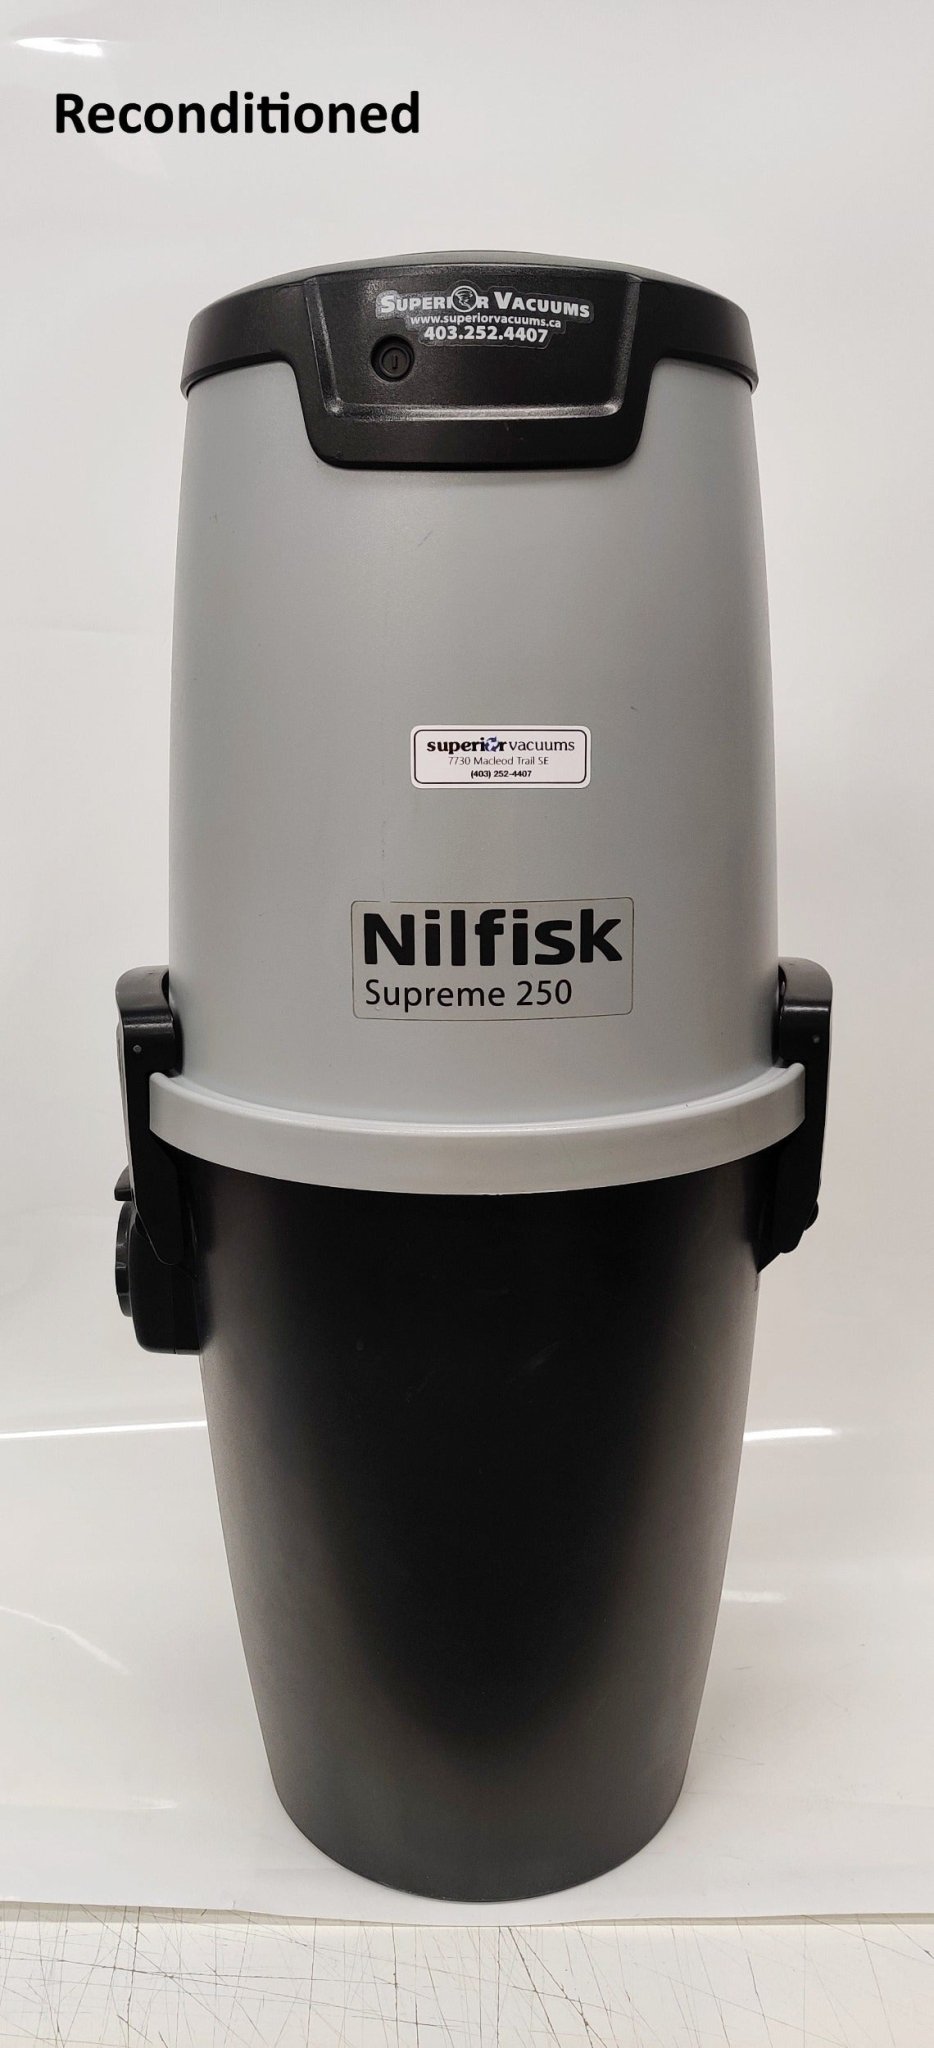 Nilfisk Supreme 250 Central Vacuum: Compact and Powerful Cleaning Solution